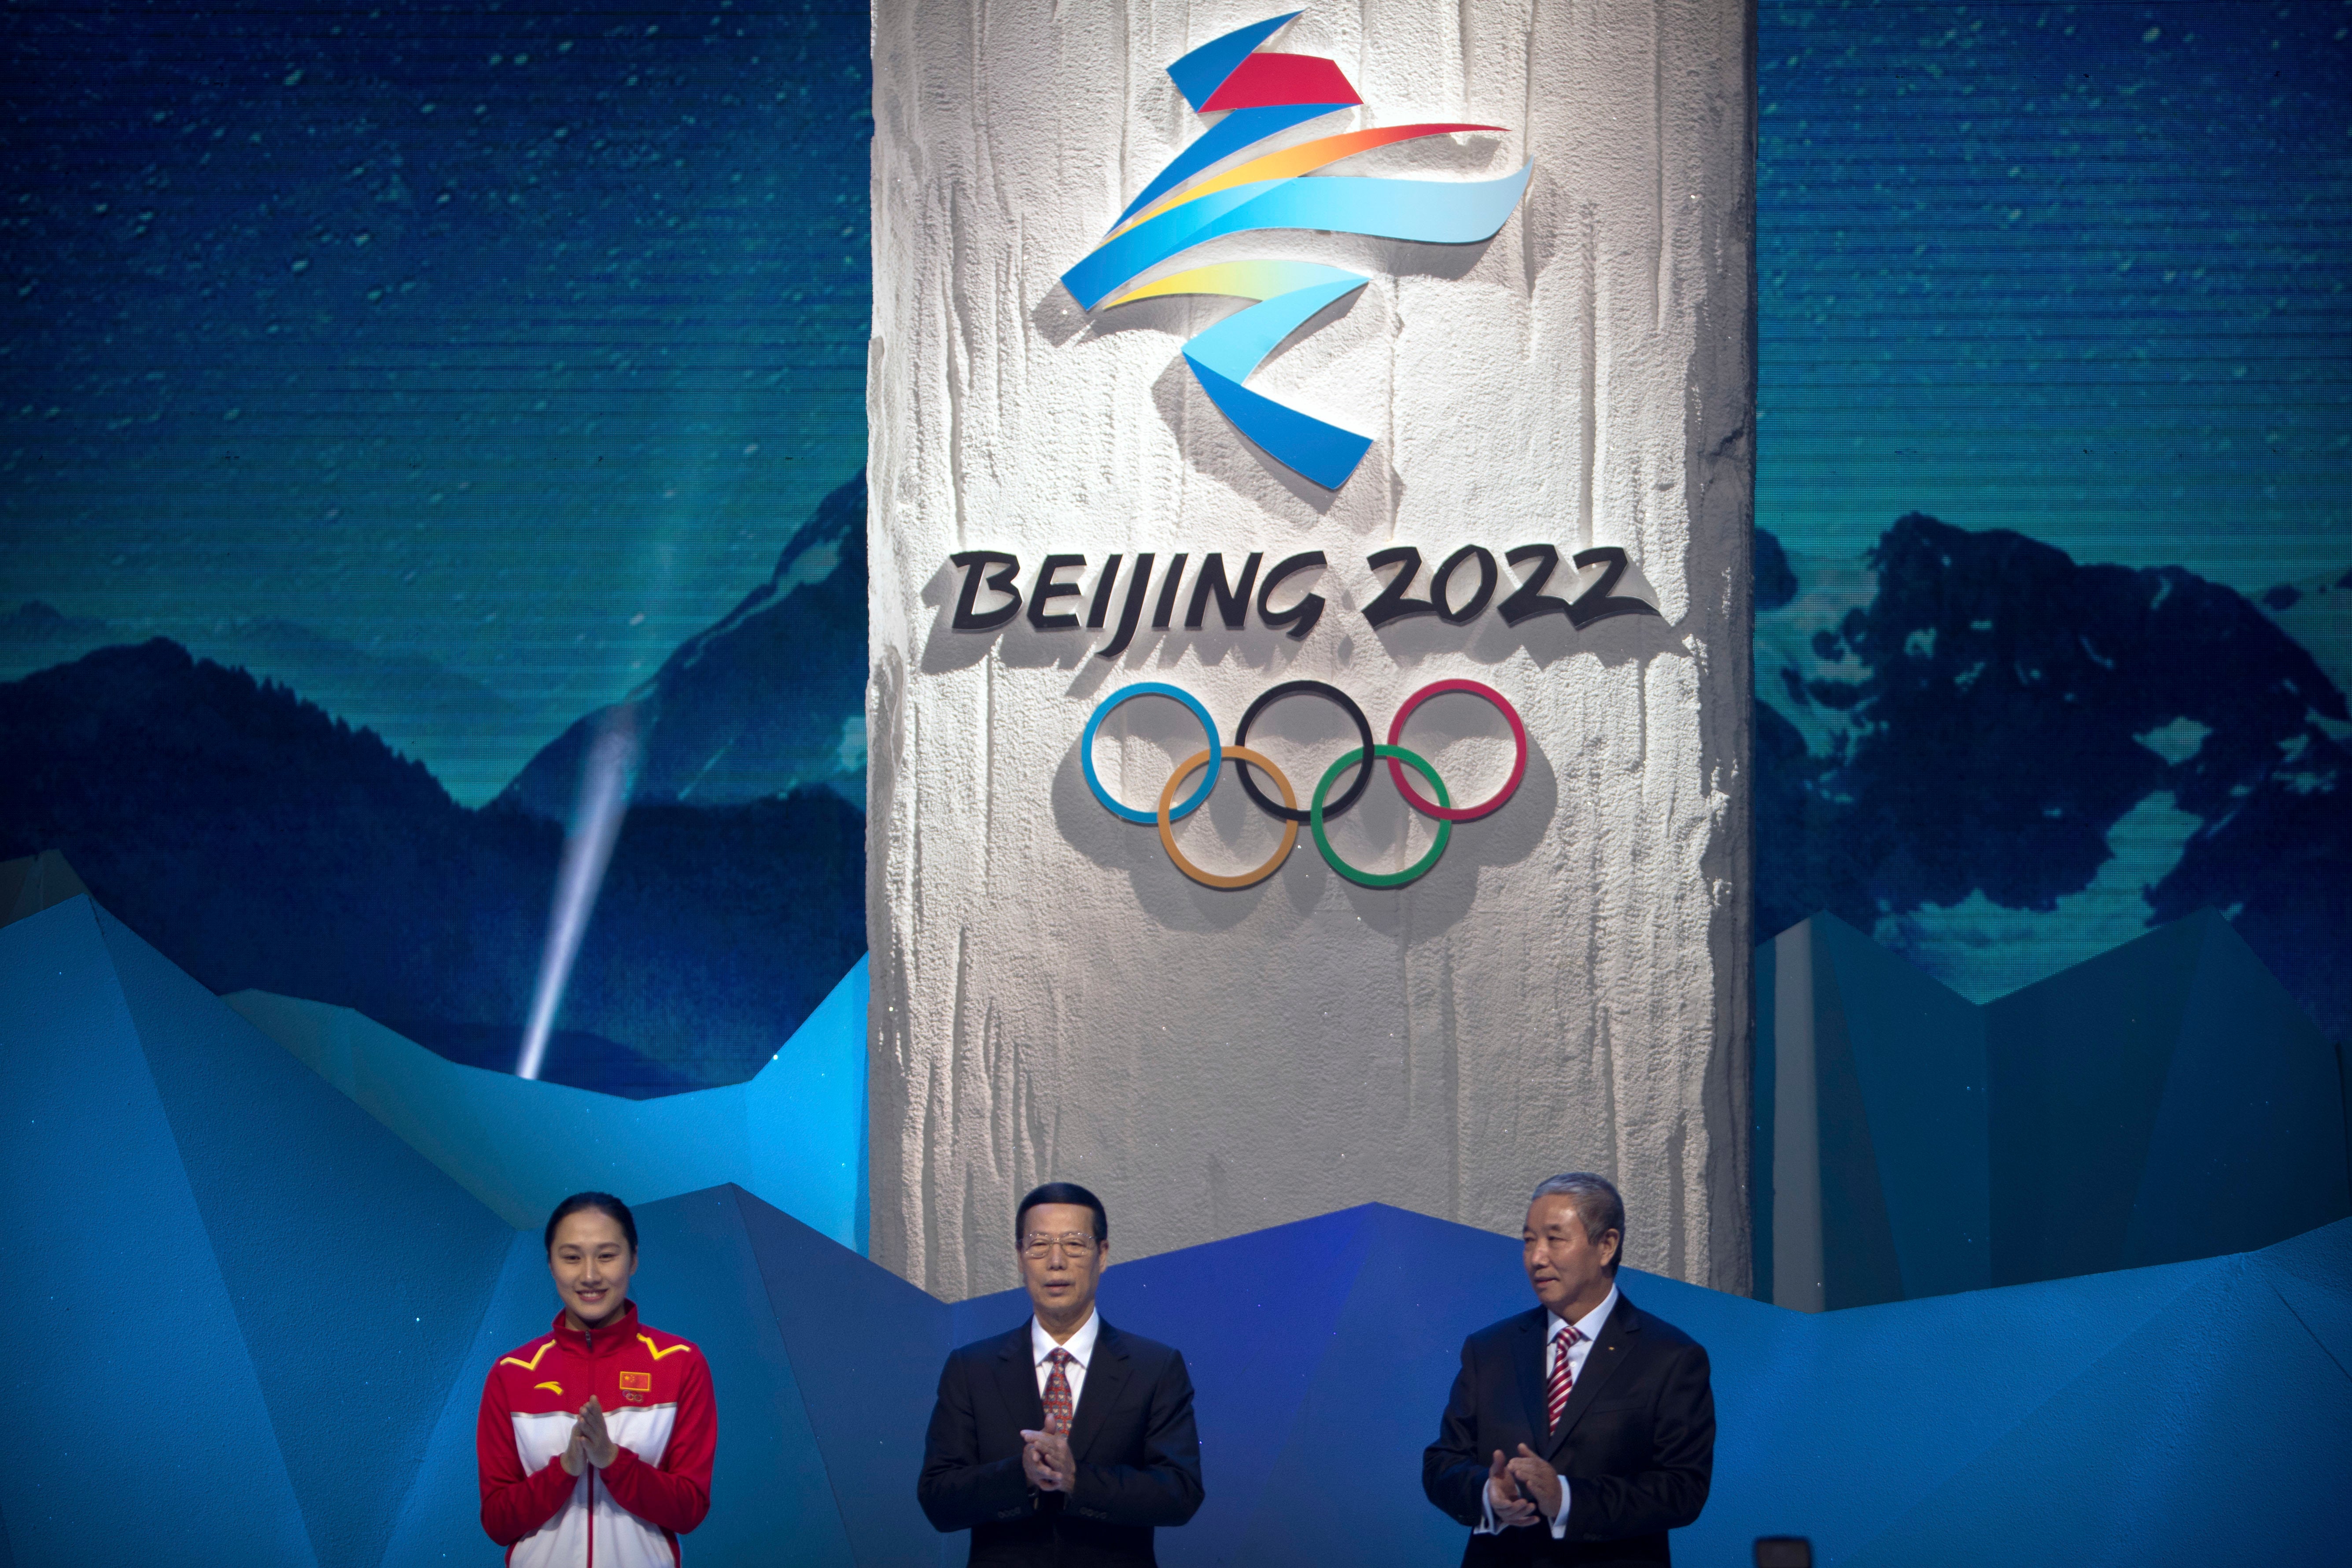 The allegations came months before the Olympics due in Beijing next February